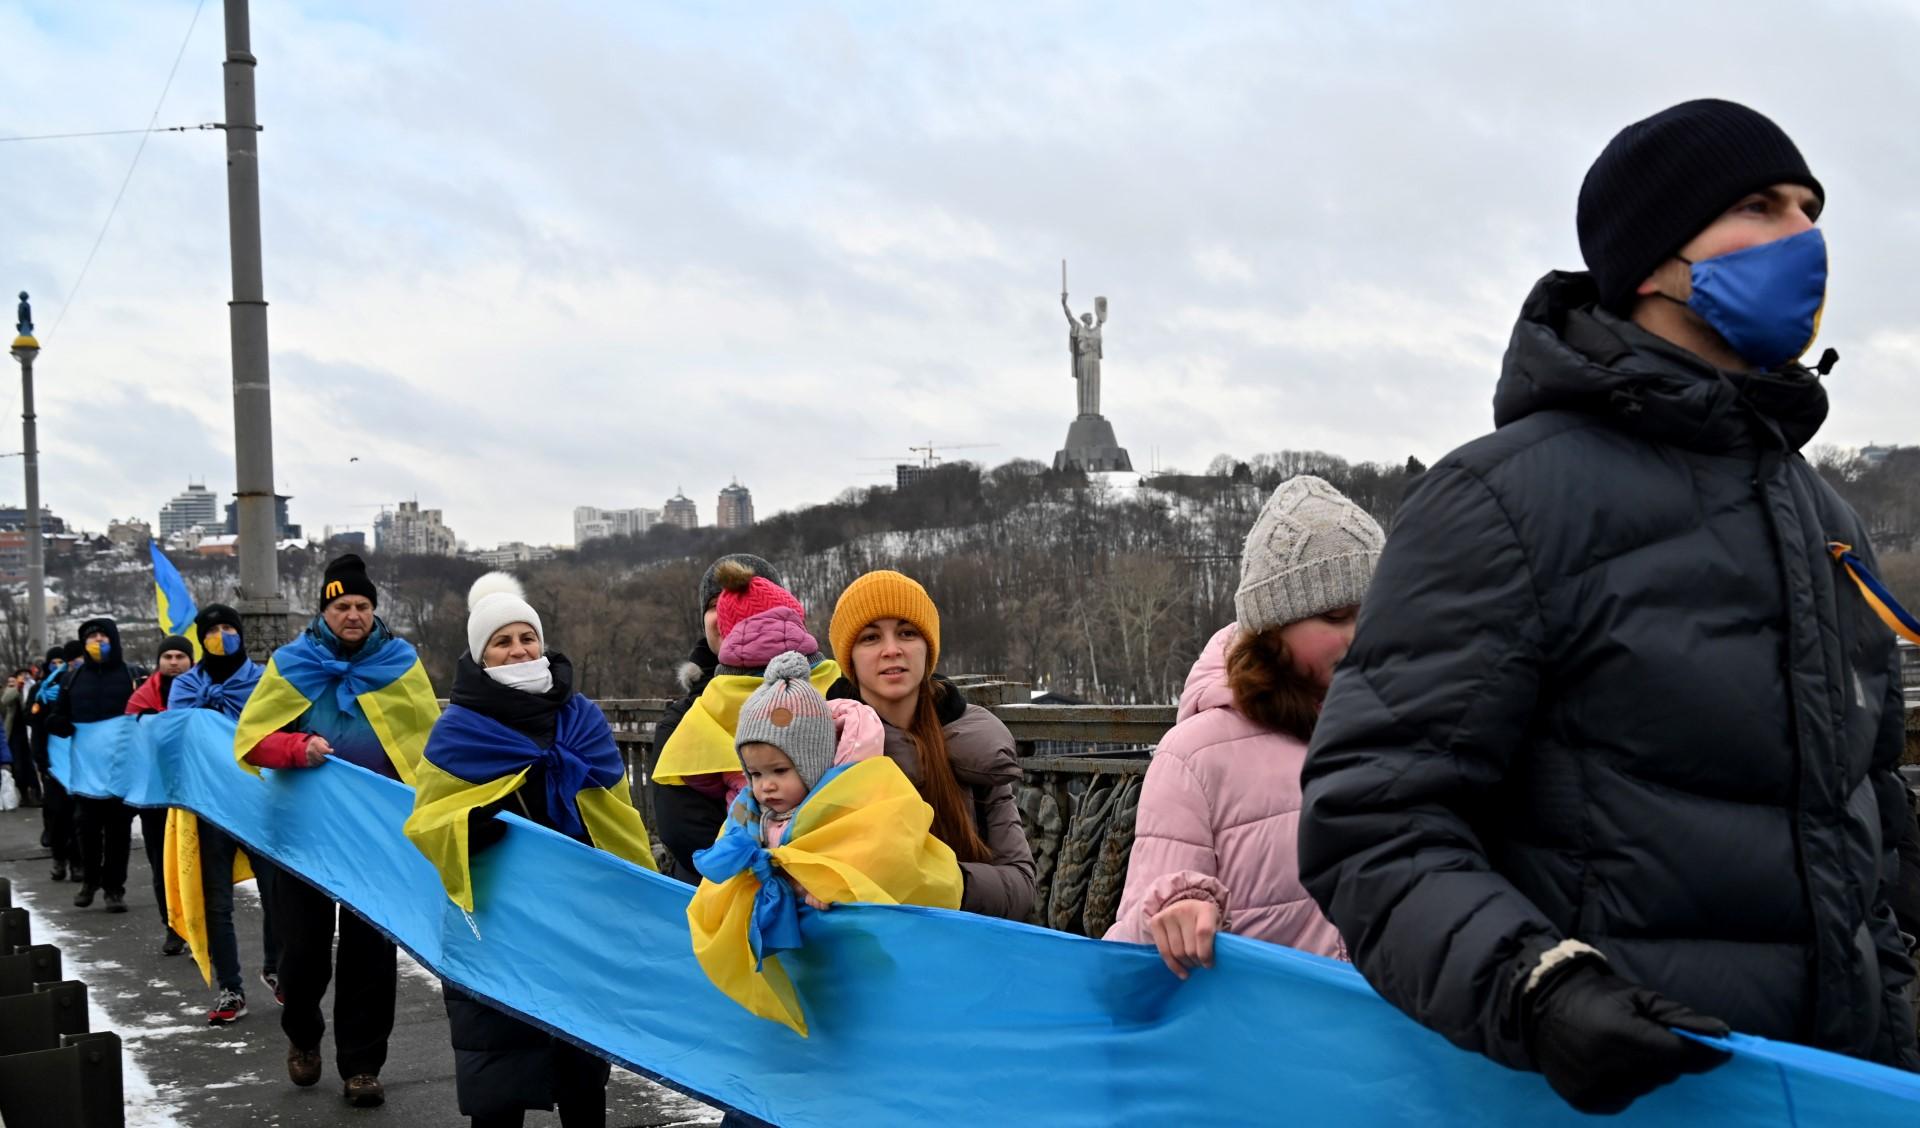 People form a symbolic human chain on a bridge across the Dnieper river in Kyiv, to mark the Day of Unity of Ukraine, on Jan 22. Photo: AFP